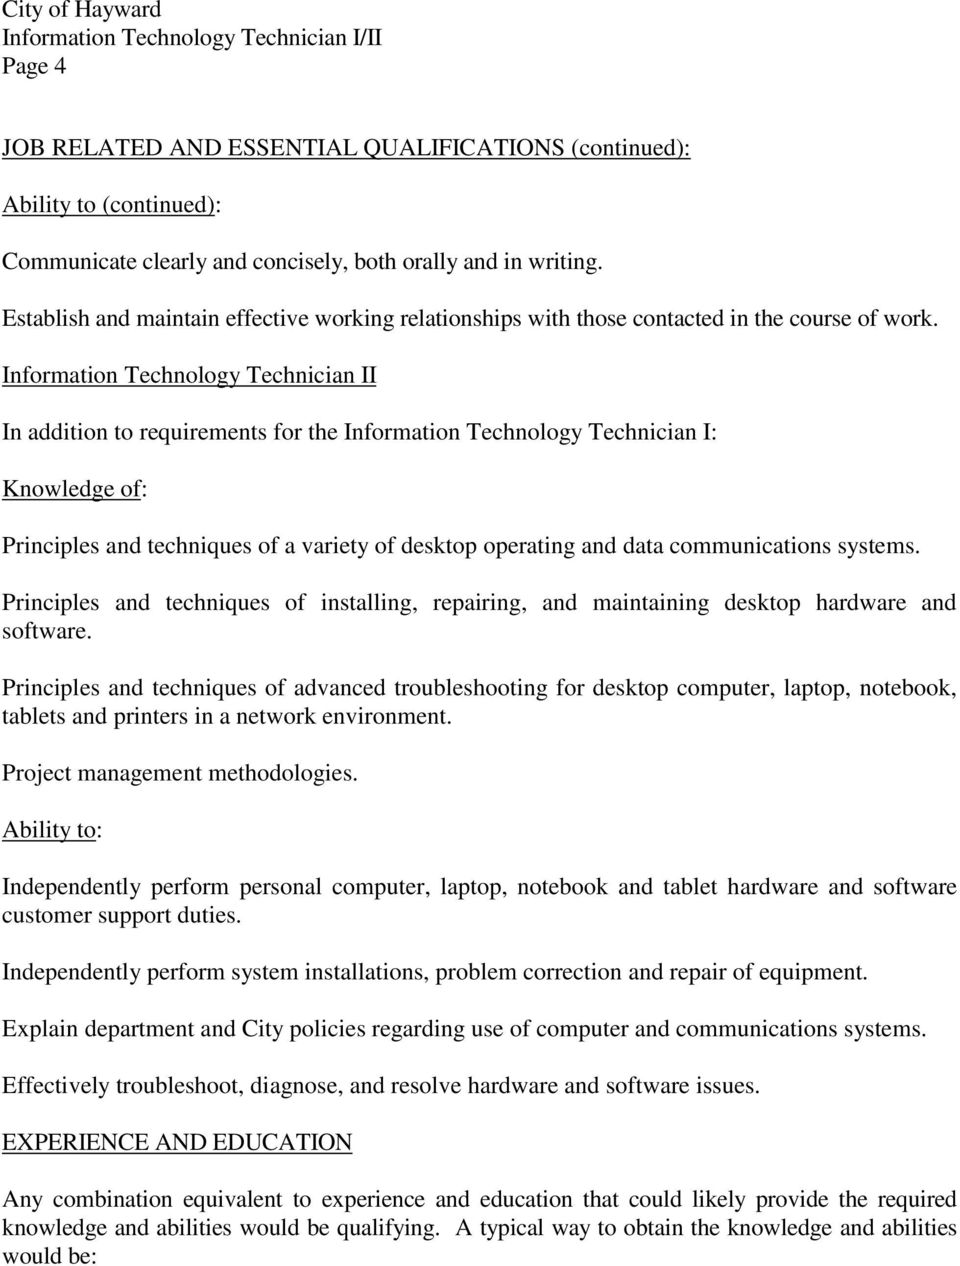 Information Technology Technician II In addition to requirements for the Information Technology Technician I: Knowledge of: Principles and techniques of a variety of desktop operating and data